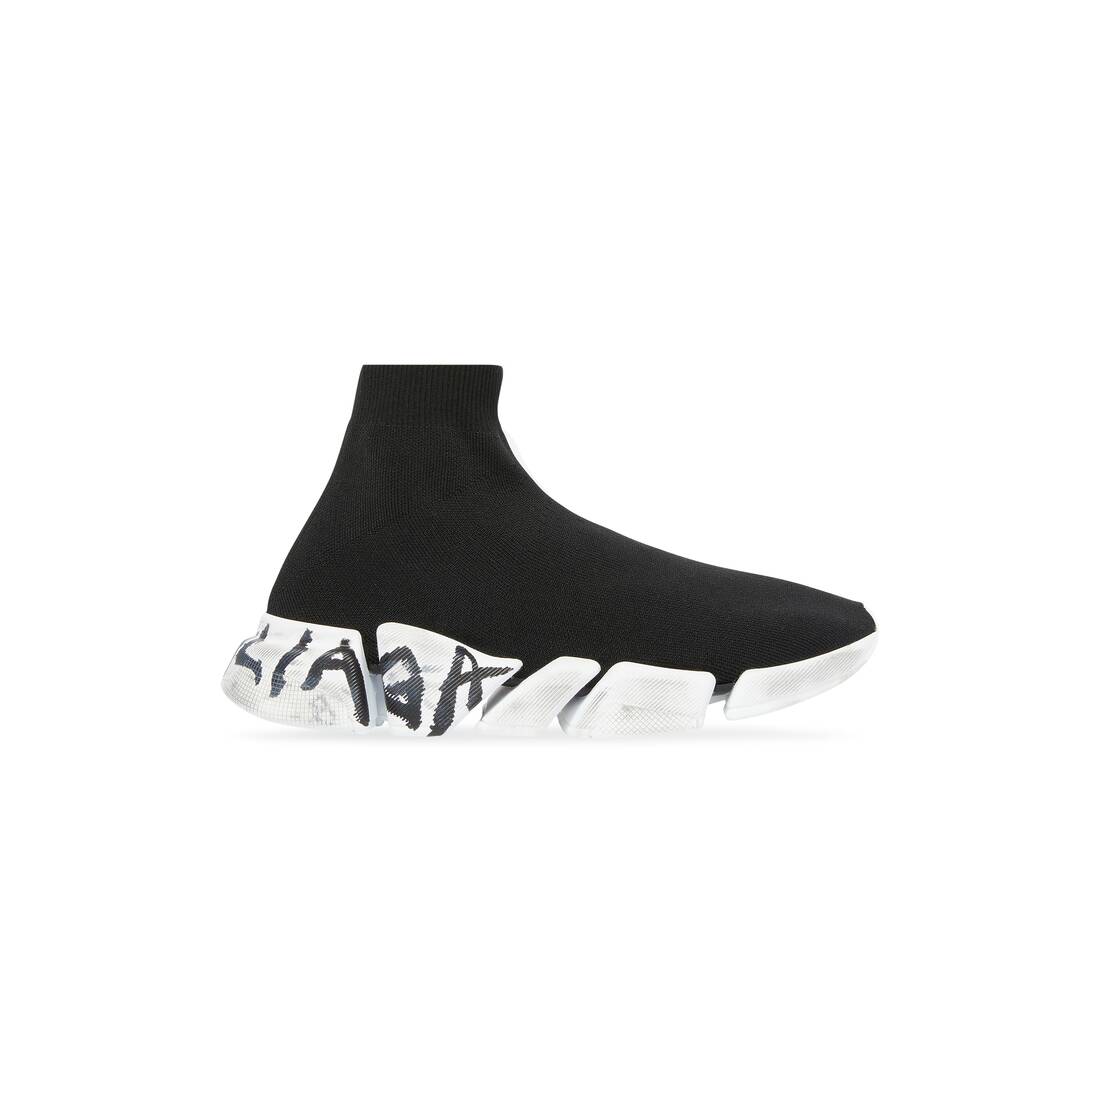 Balenciaga Speed Trainer 2.0 Sock Sneakers w/ Tags - Brown